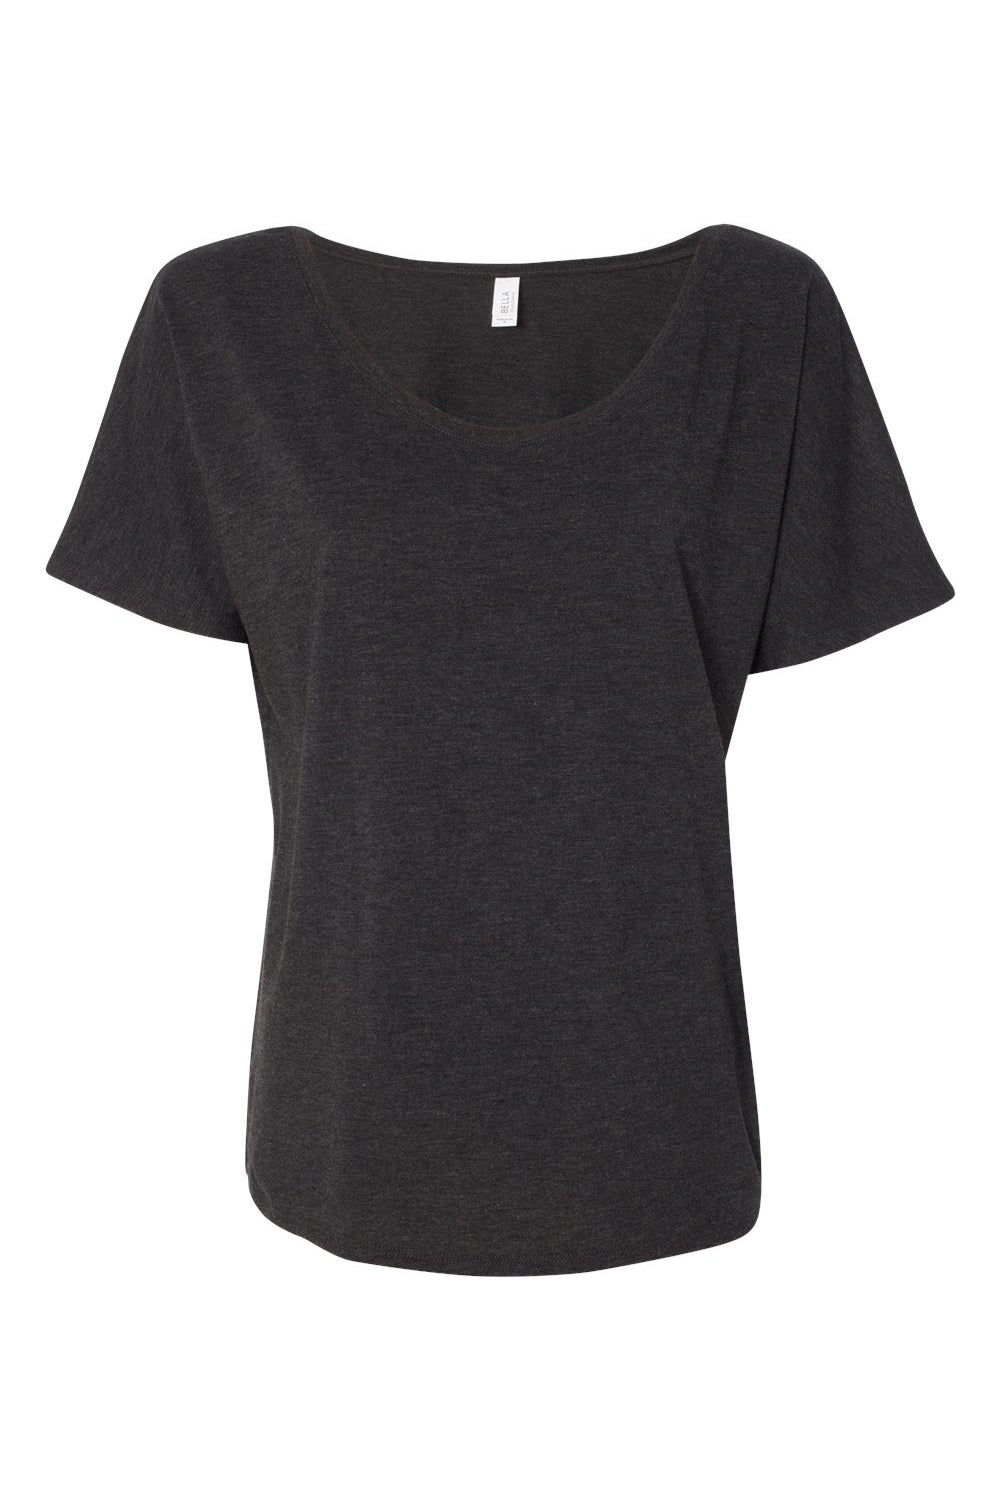 Bella + Canvas BC8816/8816 Womens Slouchy Short Sleeve Wide Neck T-Shirt Charcoal Black Triblend Flat Front